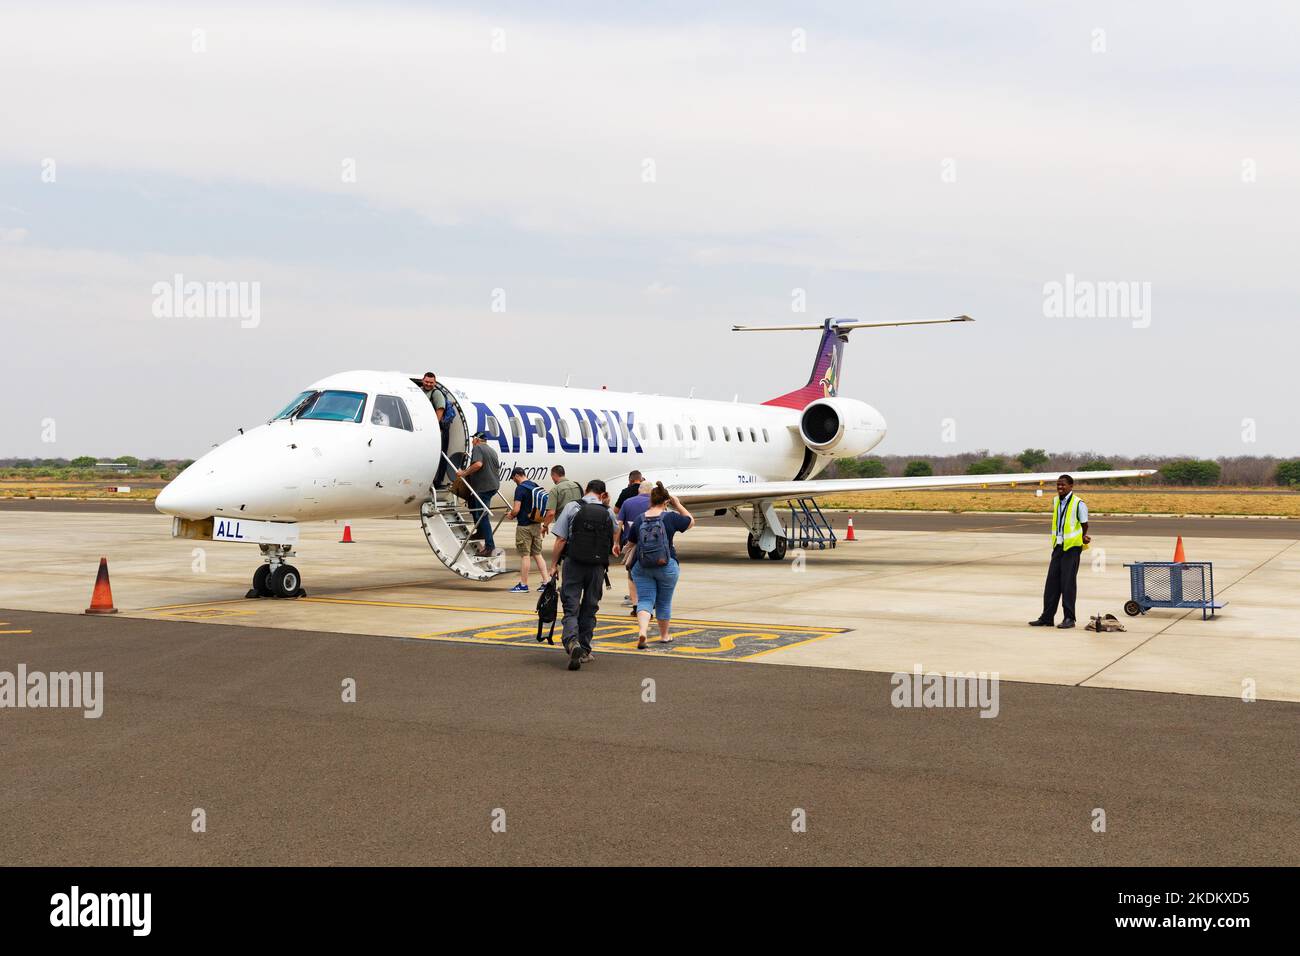 Airlink plane. An Embraer 135 on the ground at Kasane Airport, Botswana. Airlink is a South African airline serving local airports in Southern Africa Stock Photo